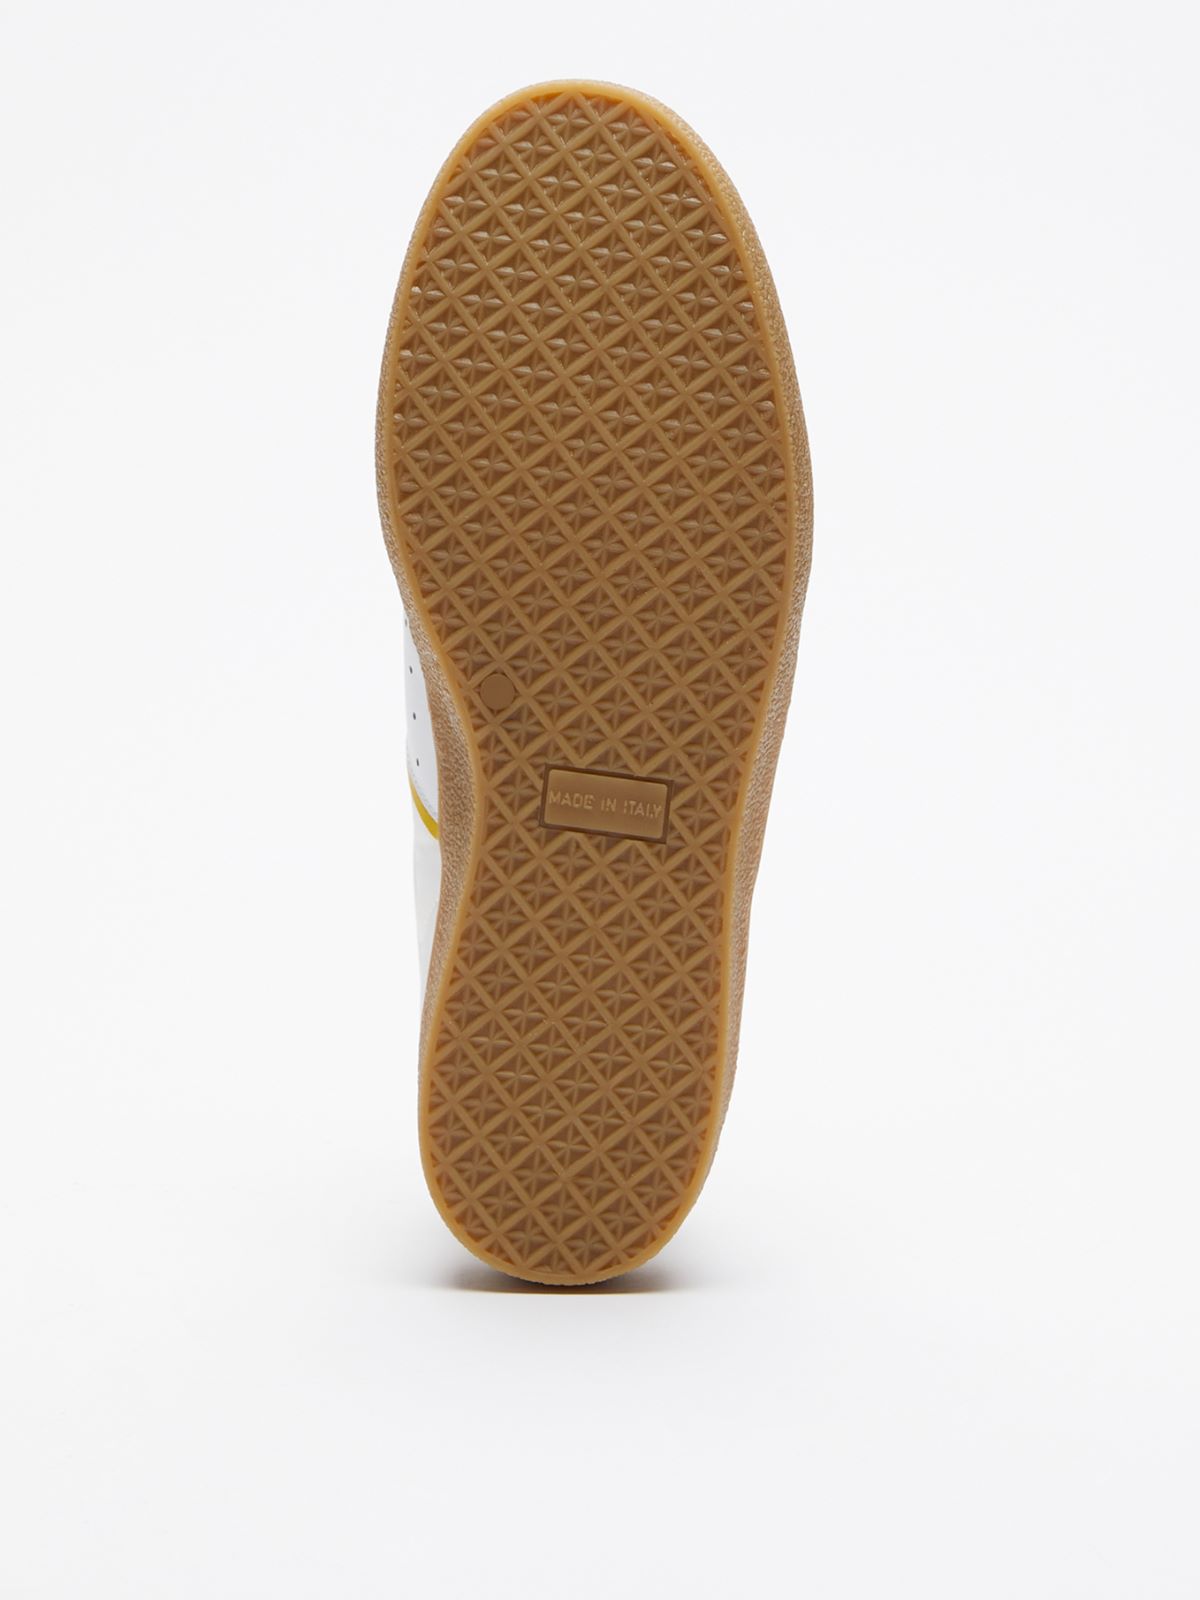 Trainers in technical fabric and leather - BRIGHT YELLOW - Weekend Max Mara - 4